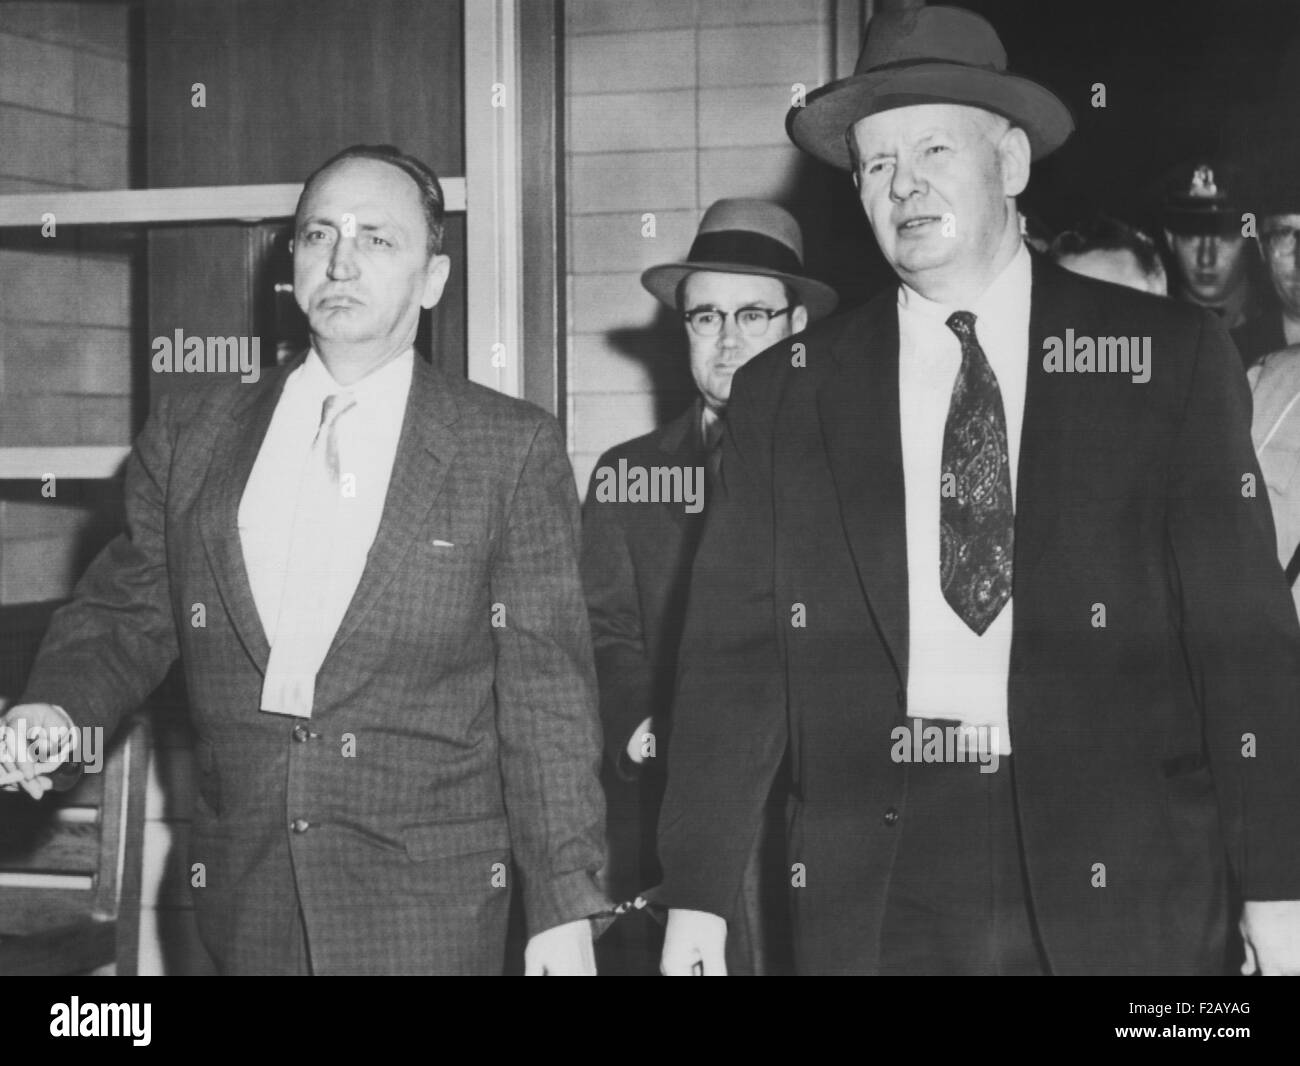 Ignatius I. Faherty (left) and Joseph F. McGinnis, entered Walpole State Prison on Oct. 9, 1956. Both received life sentences for the $1,219,000 Brinks robbery of January 17, 1950. Four movies have been based on the robbery: SIX BRIDGES TO CROSS, 1955; BLUEPRINT FOR ROBBERY, 1961; BRINKS-THE GREAT ROBBERY, 1976; THE BRINKS JOB, 1978. (CSU 2015 9 813) Stock Photo